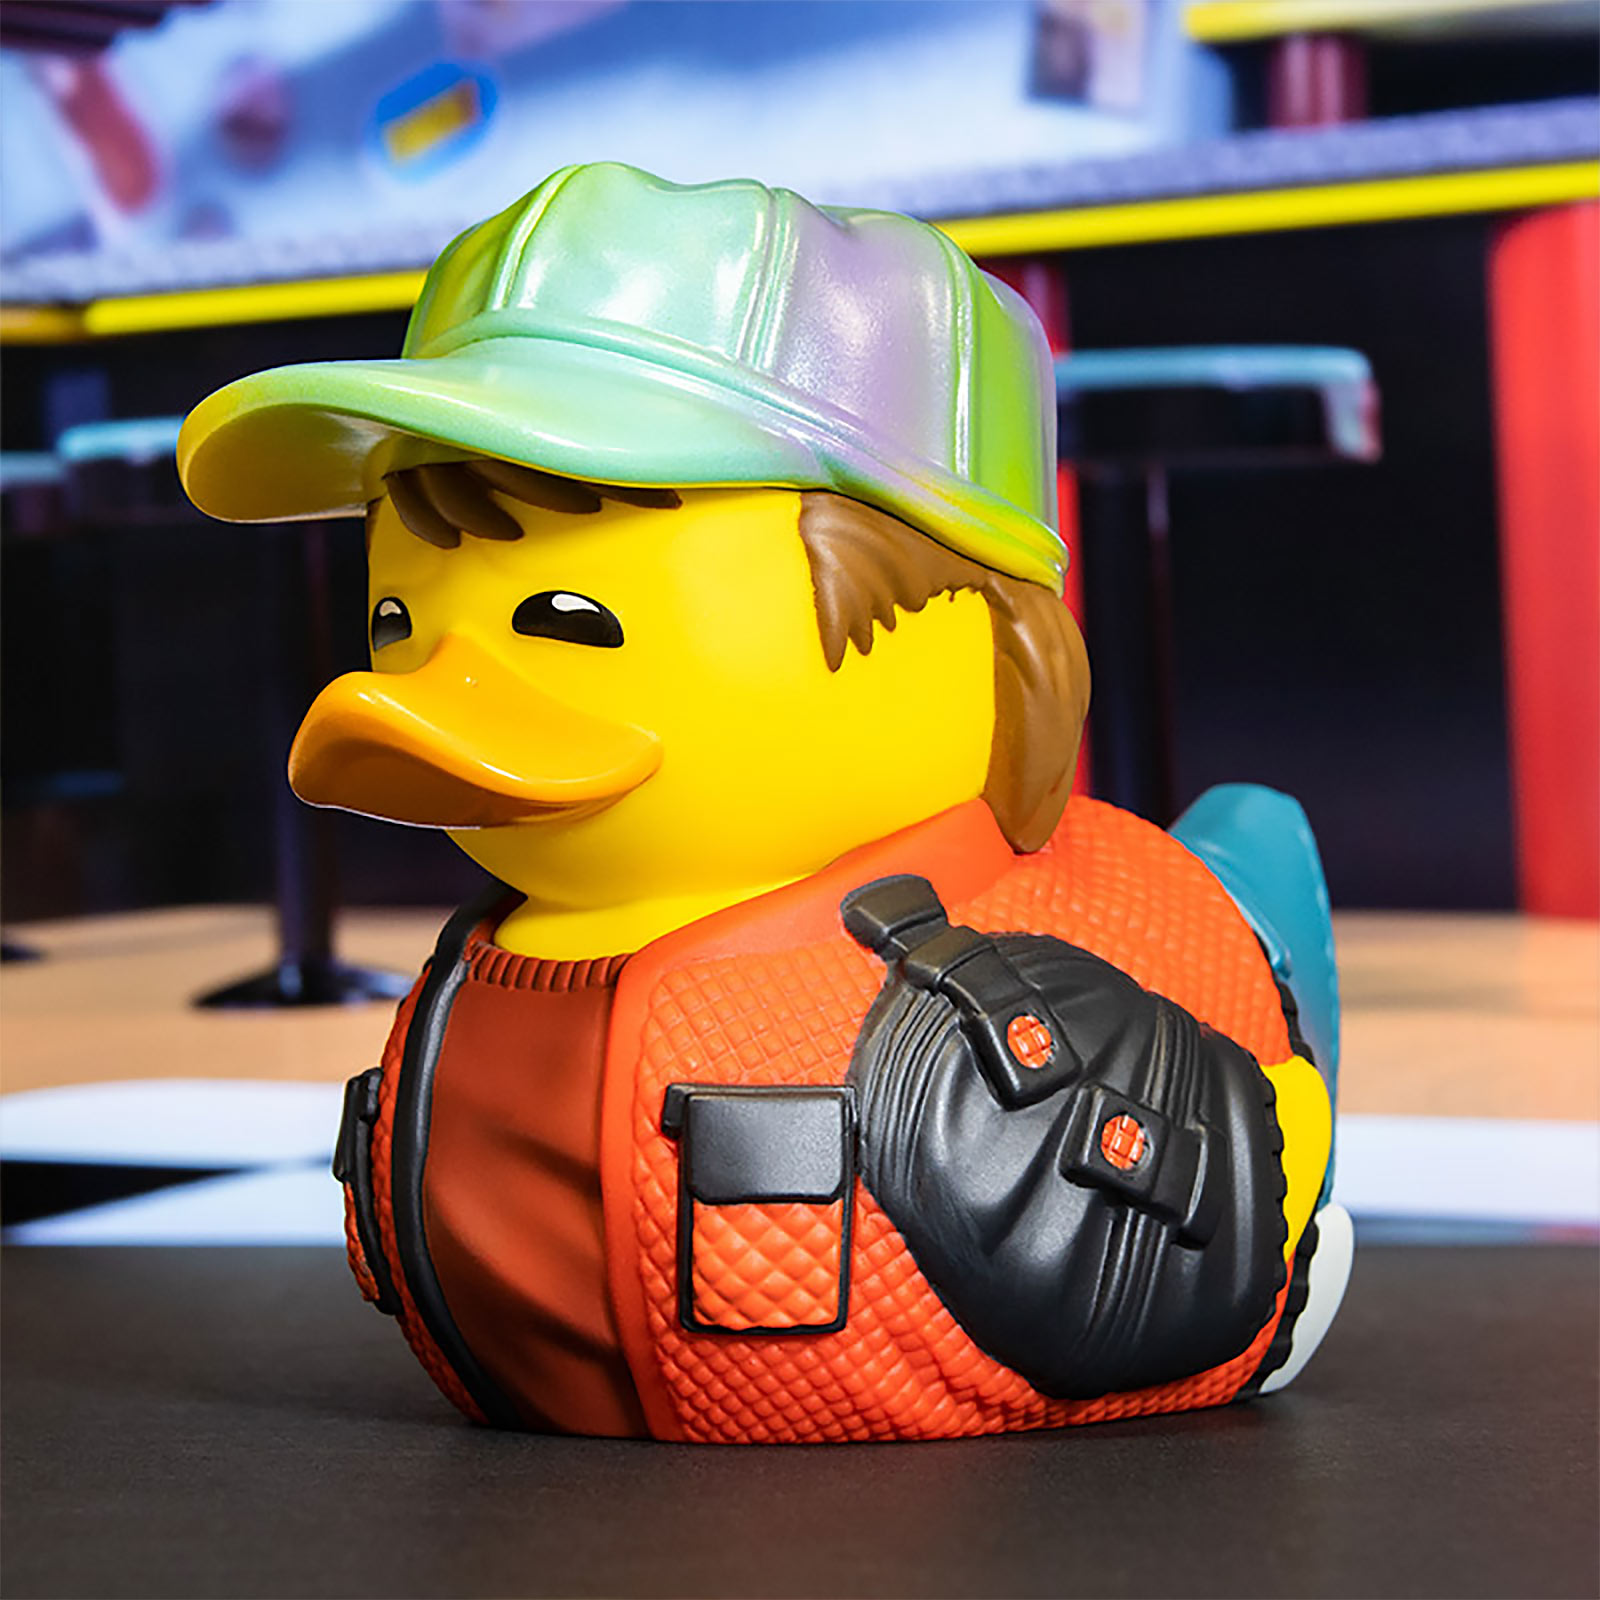 Back to the Future - Marty McFly 2015 TUBBZ Decorative Duck